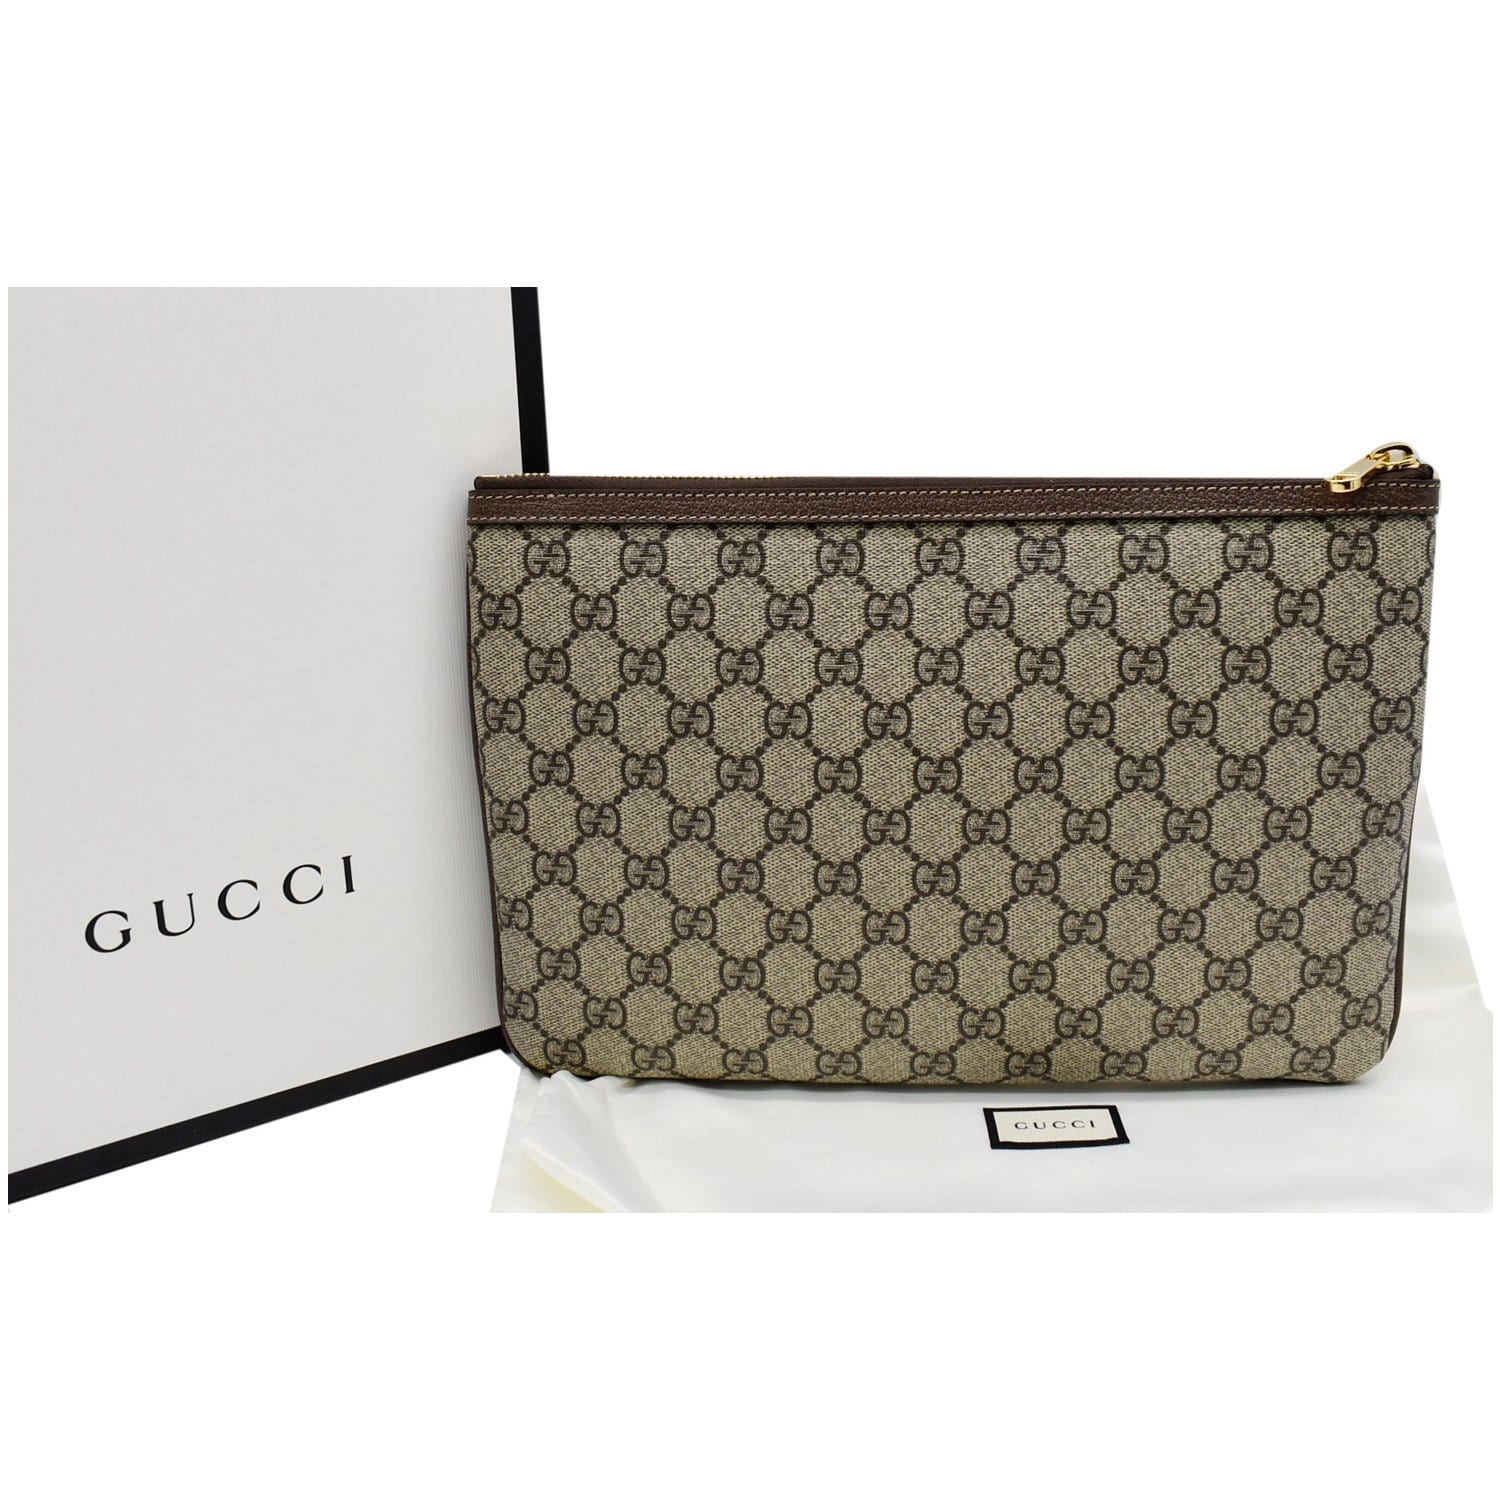 GUCCI Large Ophidia GG Supreme Monogram Leather Pouch Clutch Bag Beige